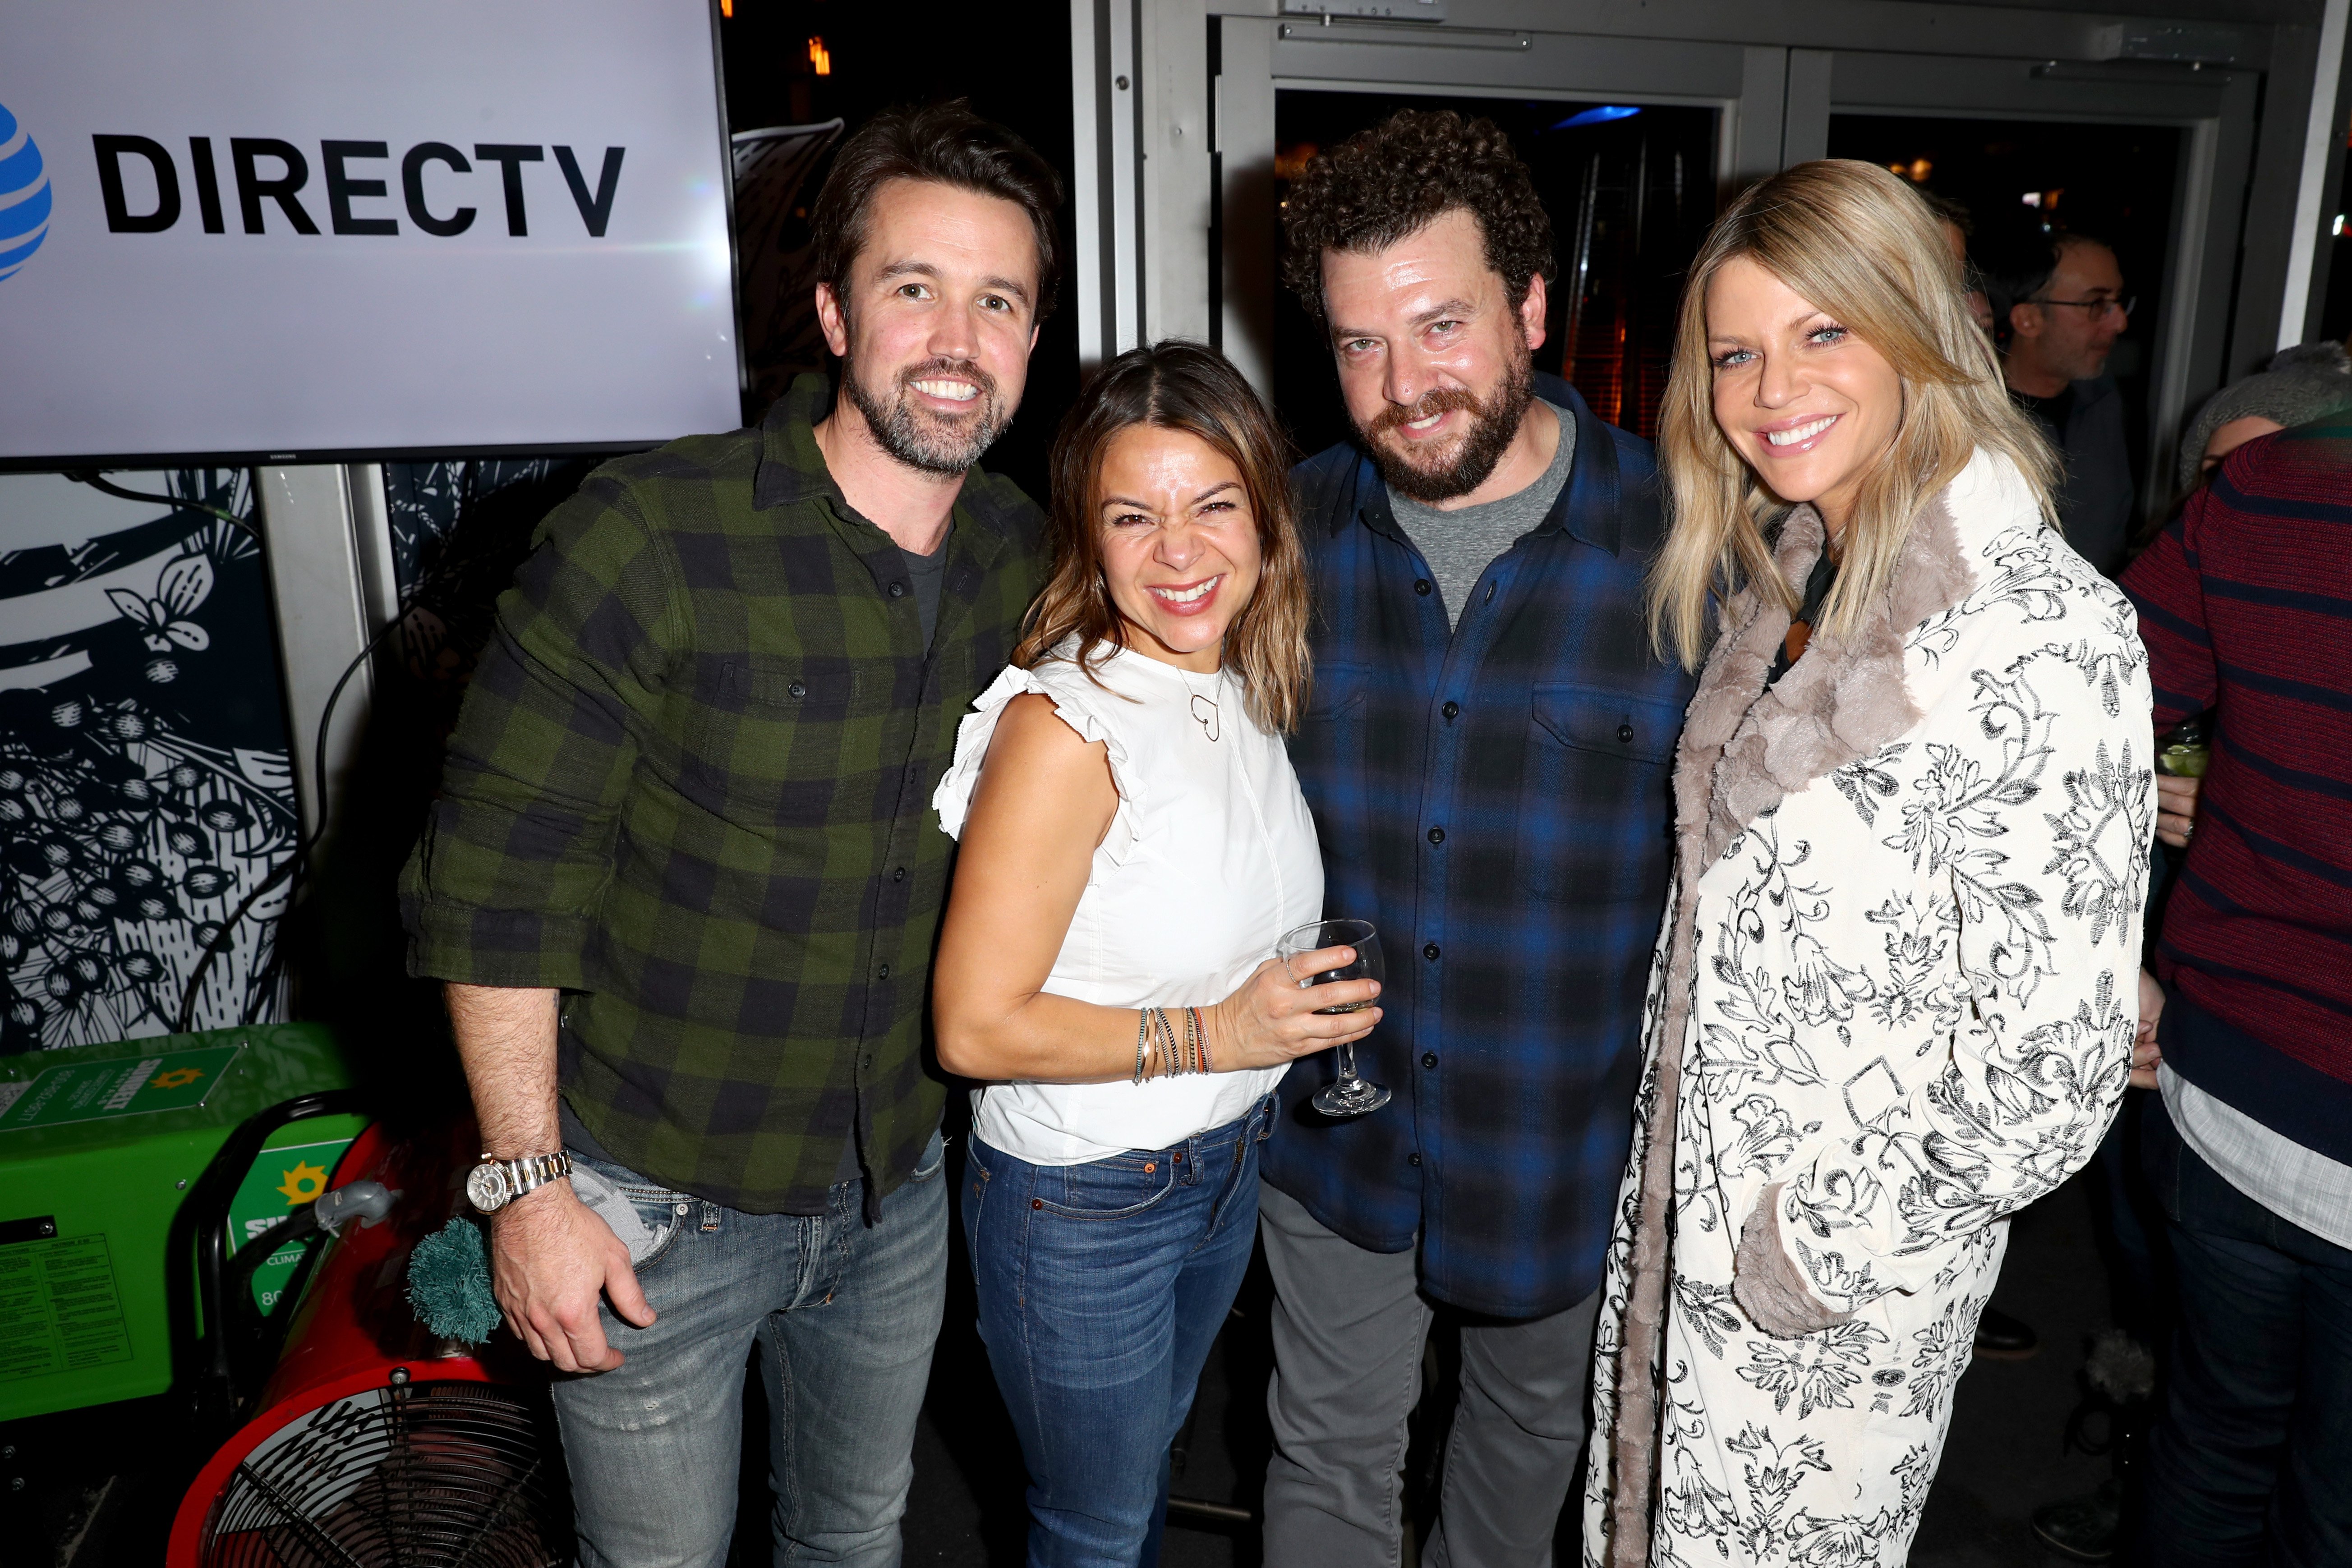 Rob McElhenney, Gia Ruiz, Danny McBride, and Katilin Olson attend "Arizona" cocktail party at DIRECTV Lodge on January 20, 2018, in Park City, Utah. | Source: Getty Images